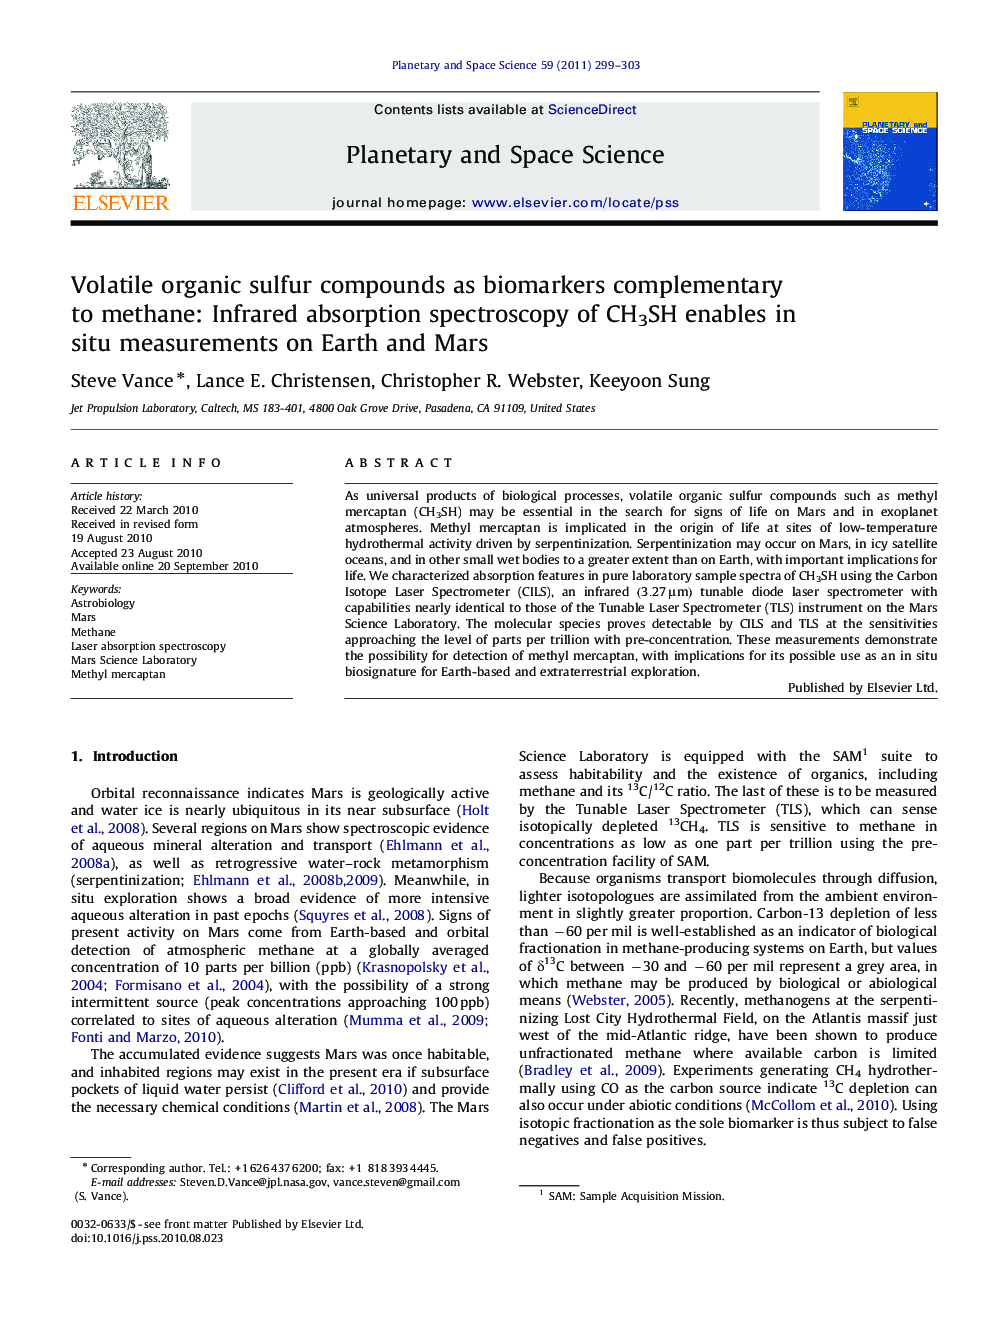 Volatile organic sulfur compounds as biomarkers complementary to methane: Infrared absorption spectroscopy of CH3SH enables insitu measurements on Earth and Mars